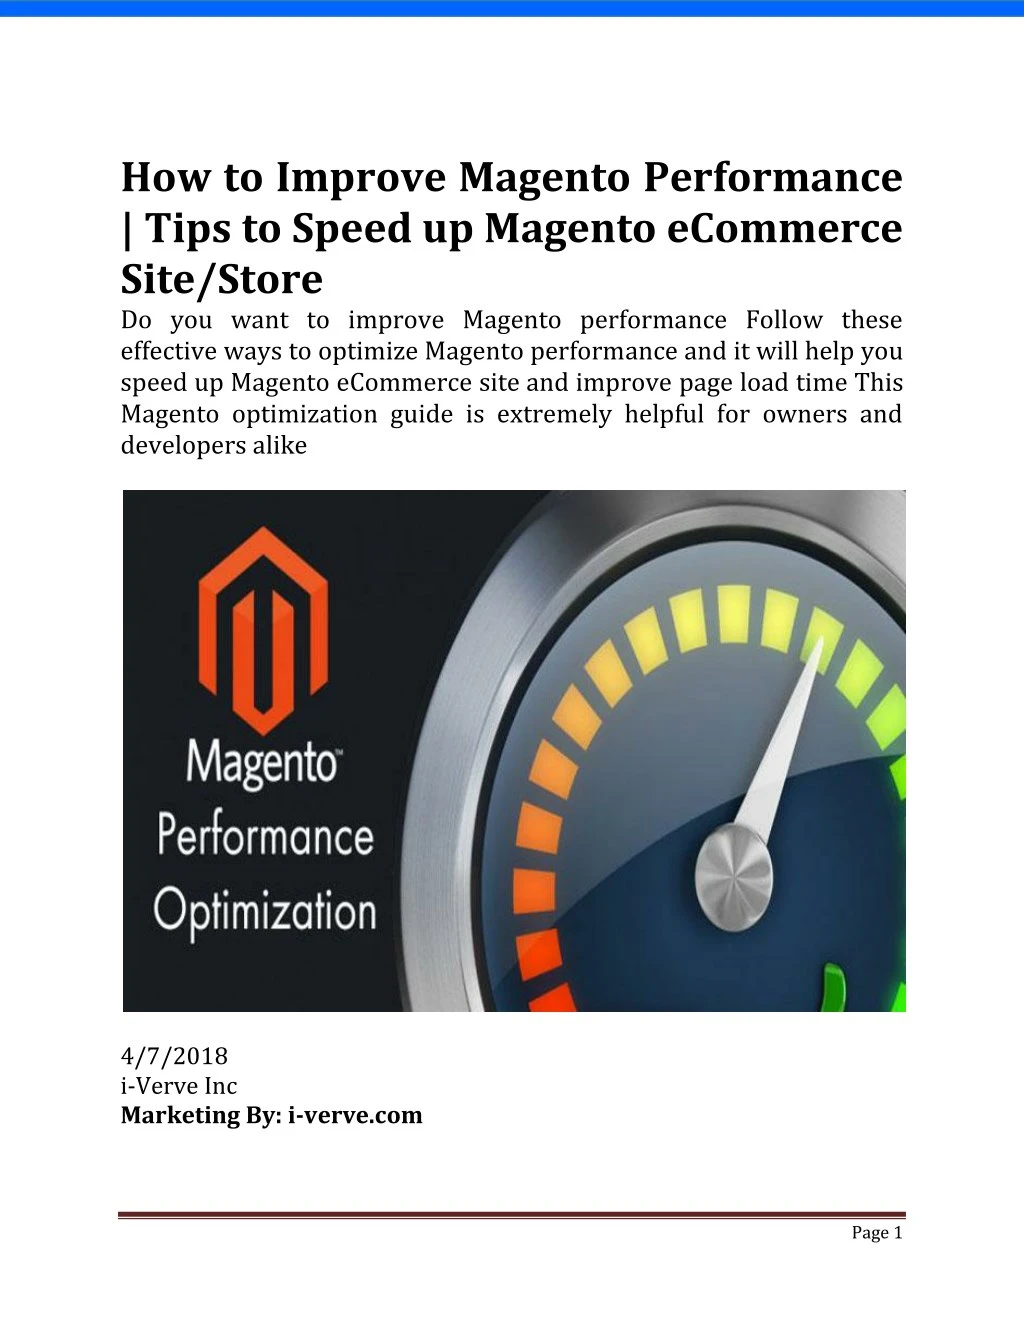 how to improve magento performance tips to speed